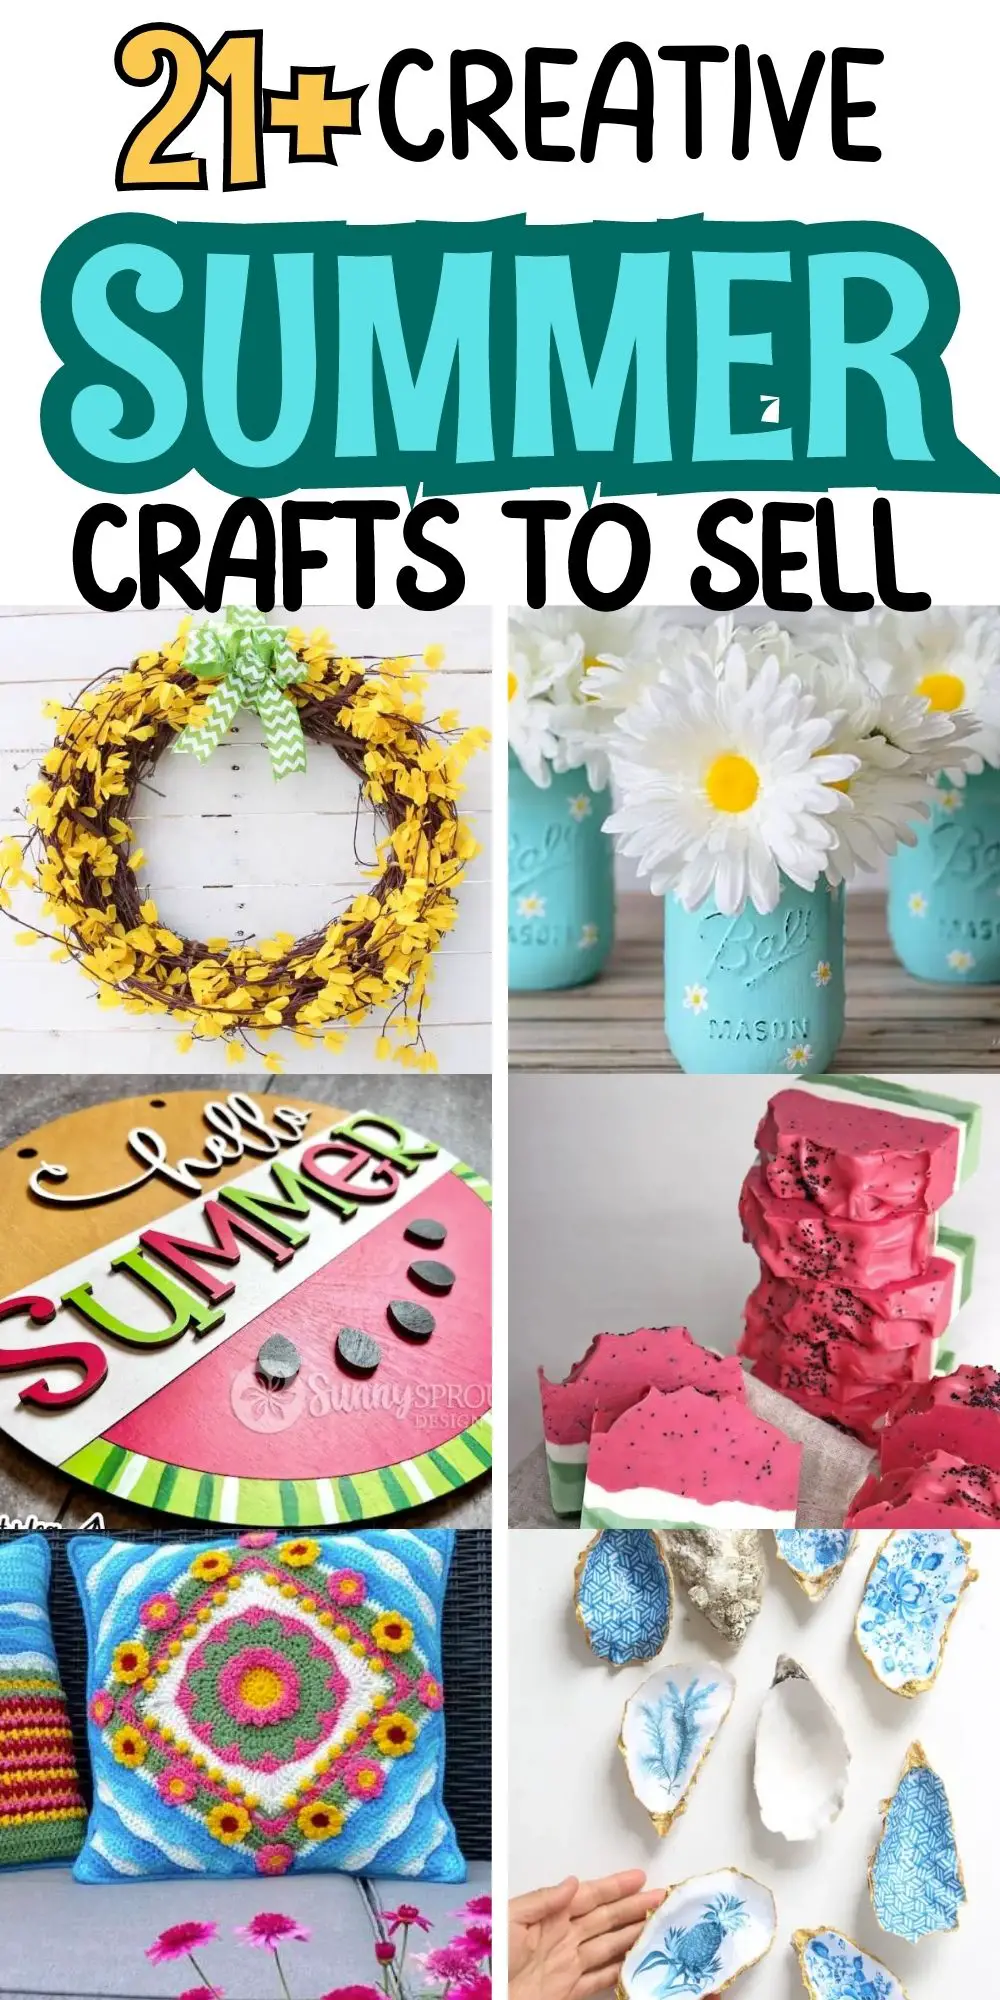 SUMMER CRAFTS TO SELL